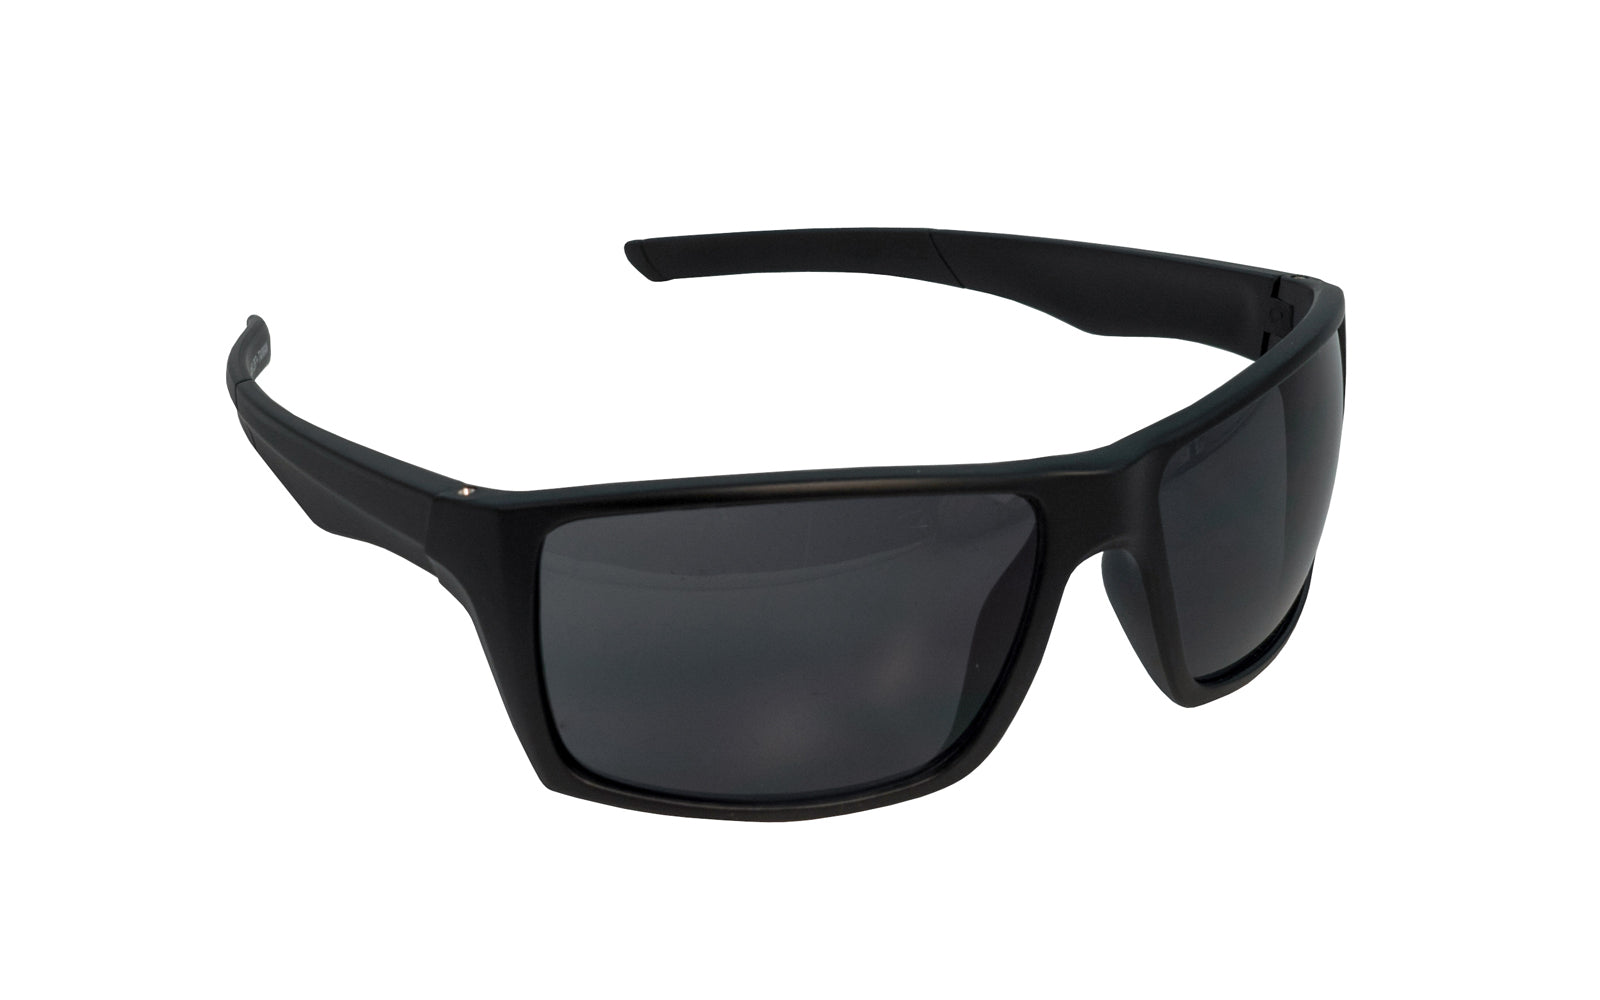 Fastcap "Hipster" Safety Glasses have tinted lenses & are great for shop & also good for outdoor sporting activities. Anti-fog & anti-static lenses.  ANSI rated Z87.1. No magnification. UV Protection - UVB 95% UVA 60%. ANSI / OSHA approved. Shatterproof & scratch resistant. 663807020871. FastCap Model SG-HIPSTER TINT